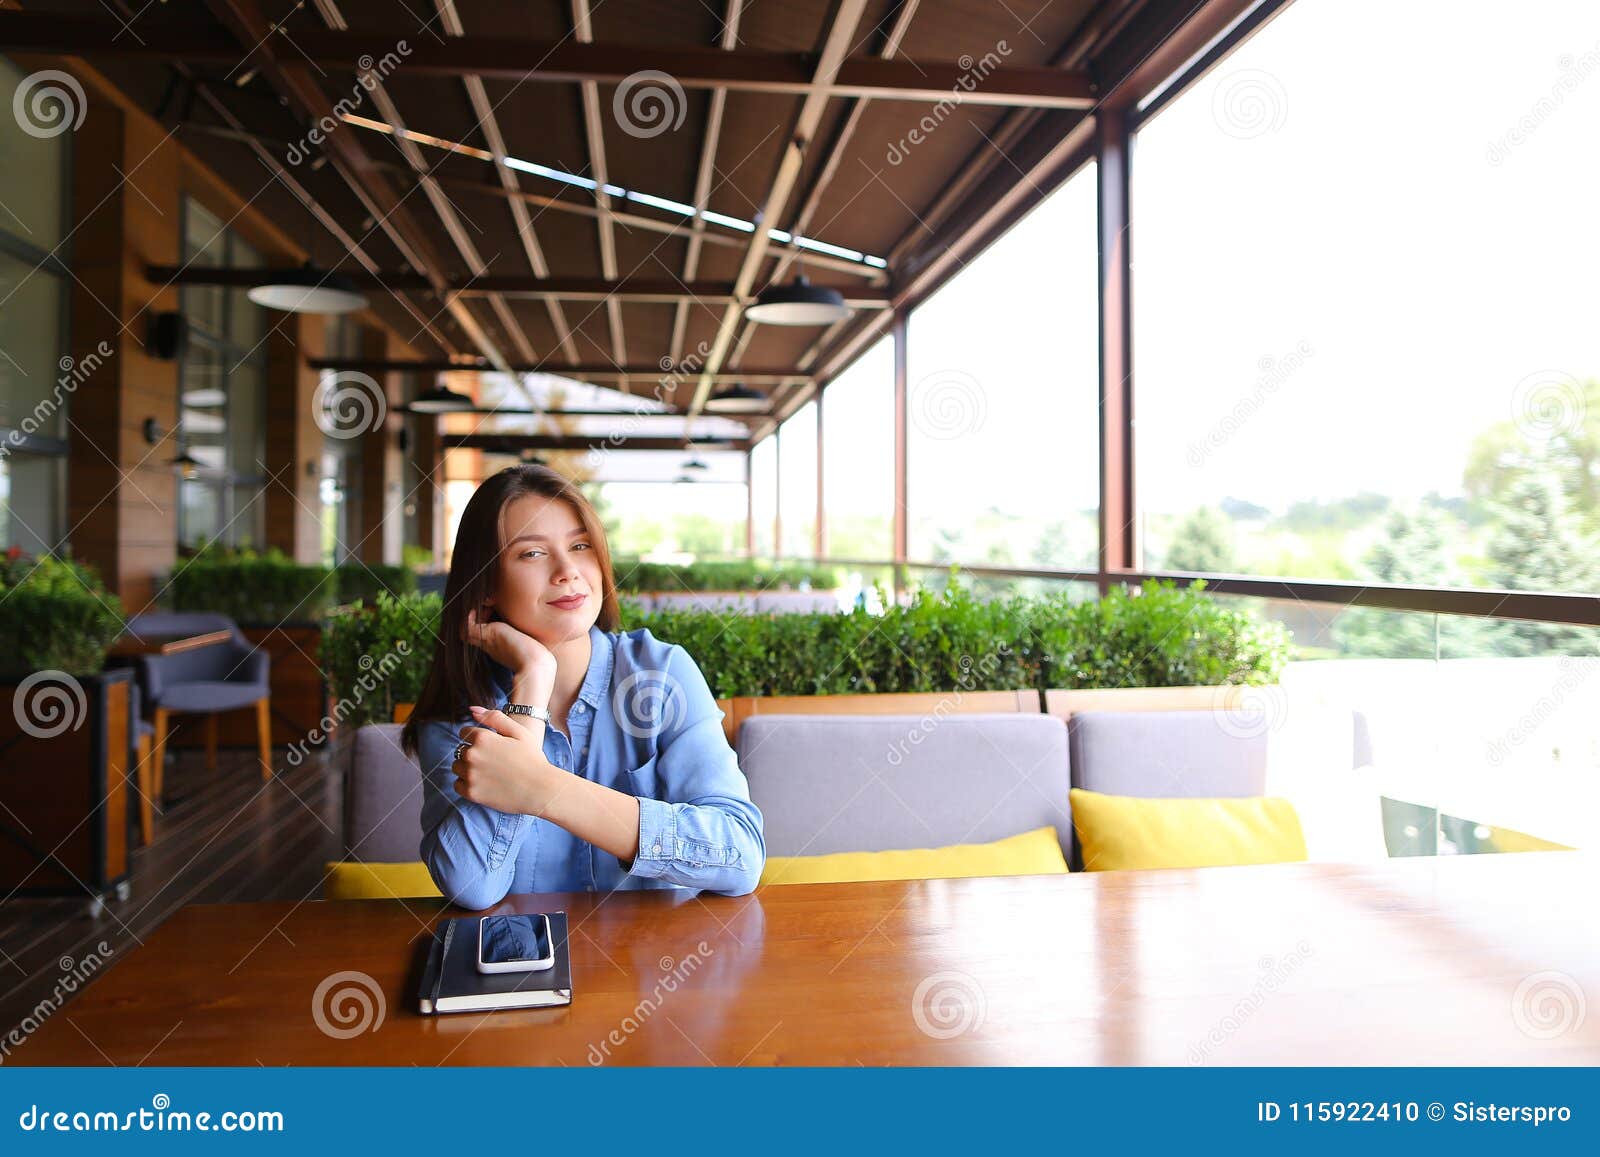 Female Beautiful Student Sitting at Cafe with Smartphone and Notebook ...